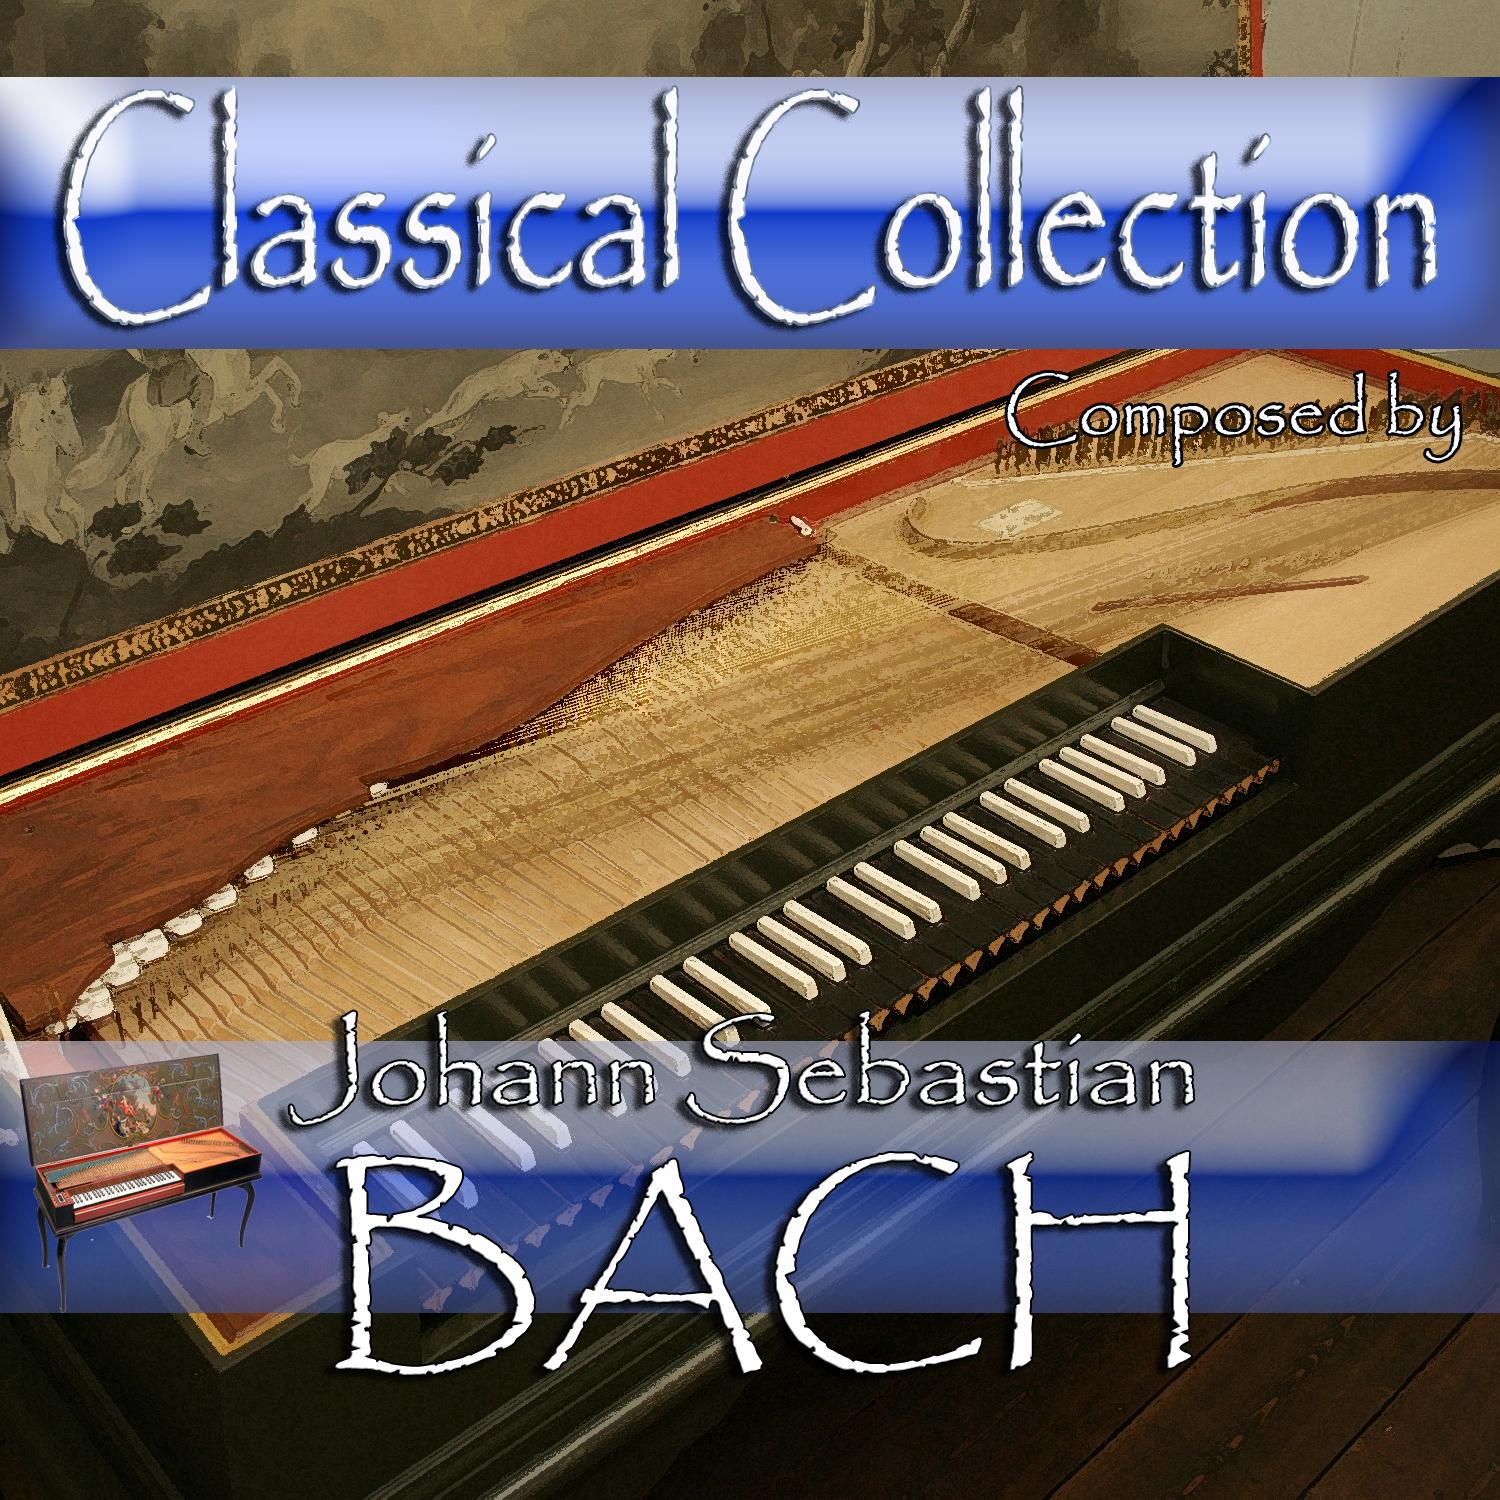 Concerto in D Minor for Harpsichord and Orchestra, BWV 1052: III. Allegro